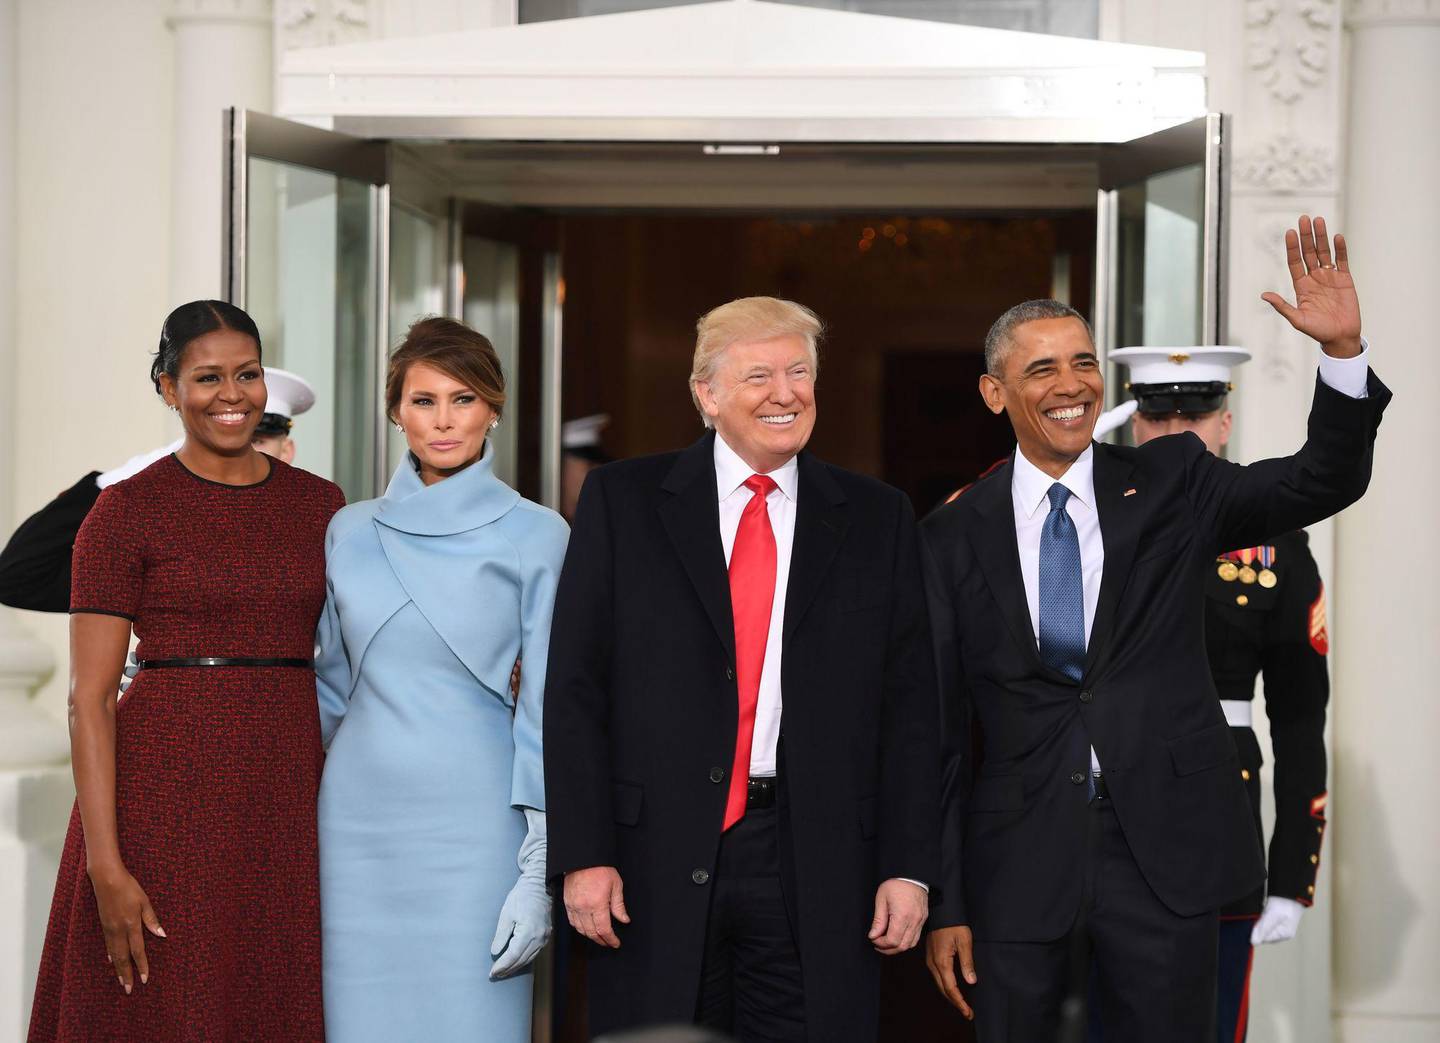 US President Barack Obama(R) and First Lady Michelle Obama(L) welcome Preisdent-elect Donald Trump(2nd-R) and his wife Melania to the White House in Washington, DC January 20, 2017.  / AFP PHOTO / JIM WATSON